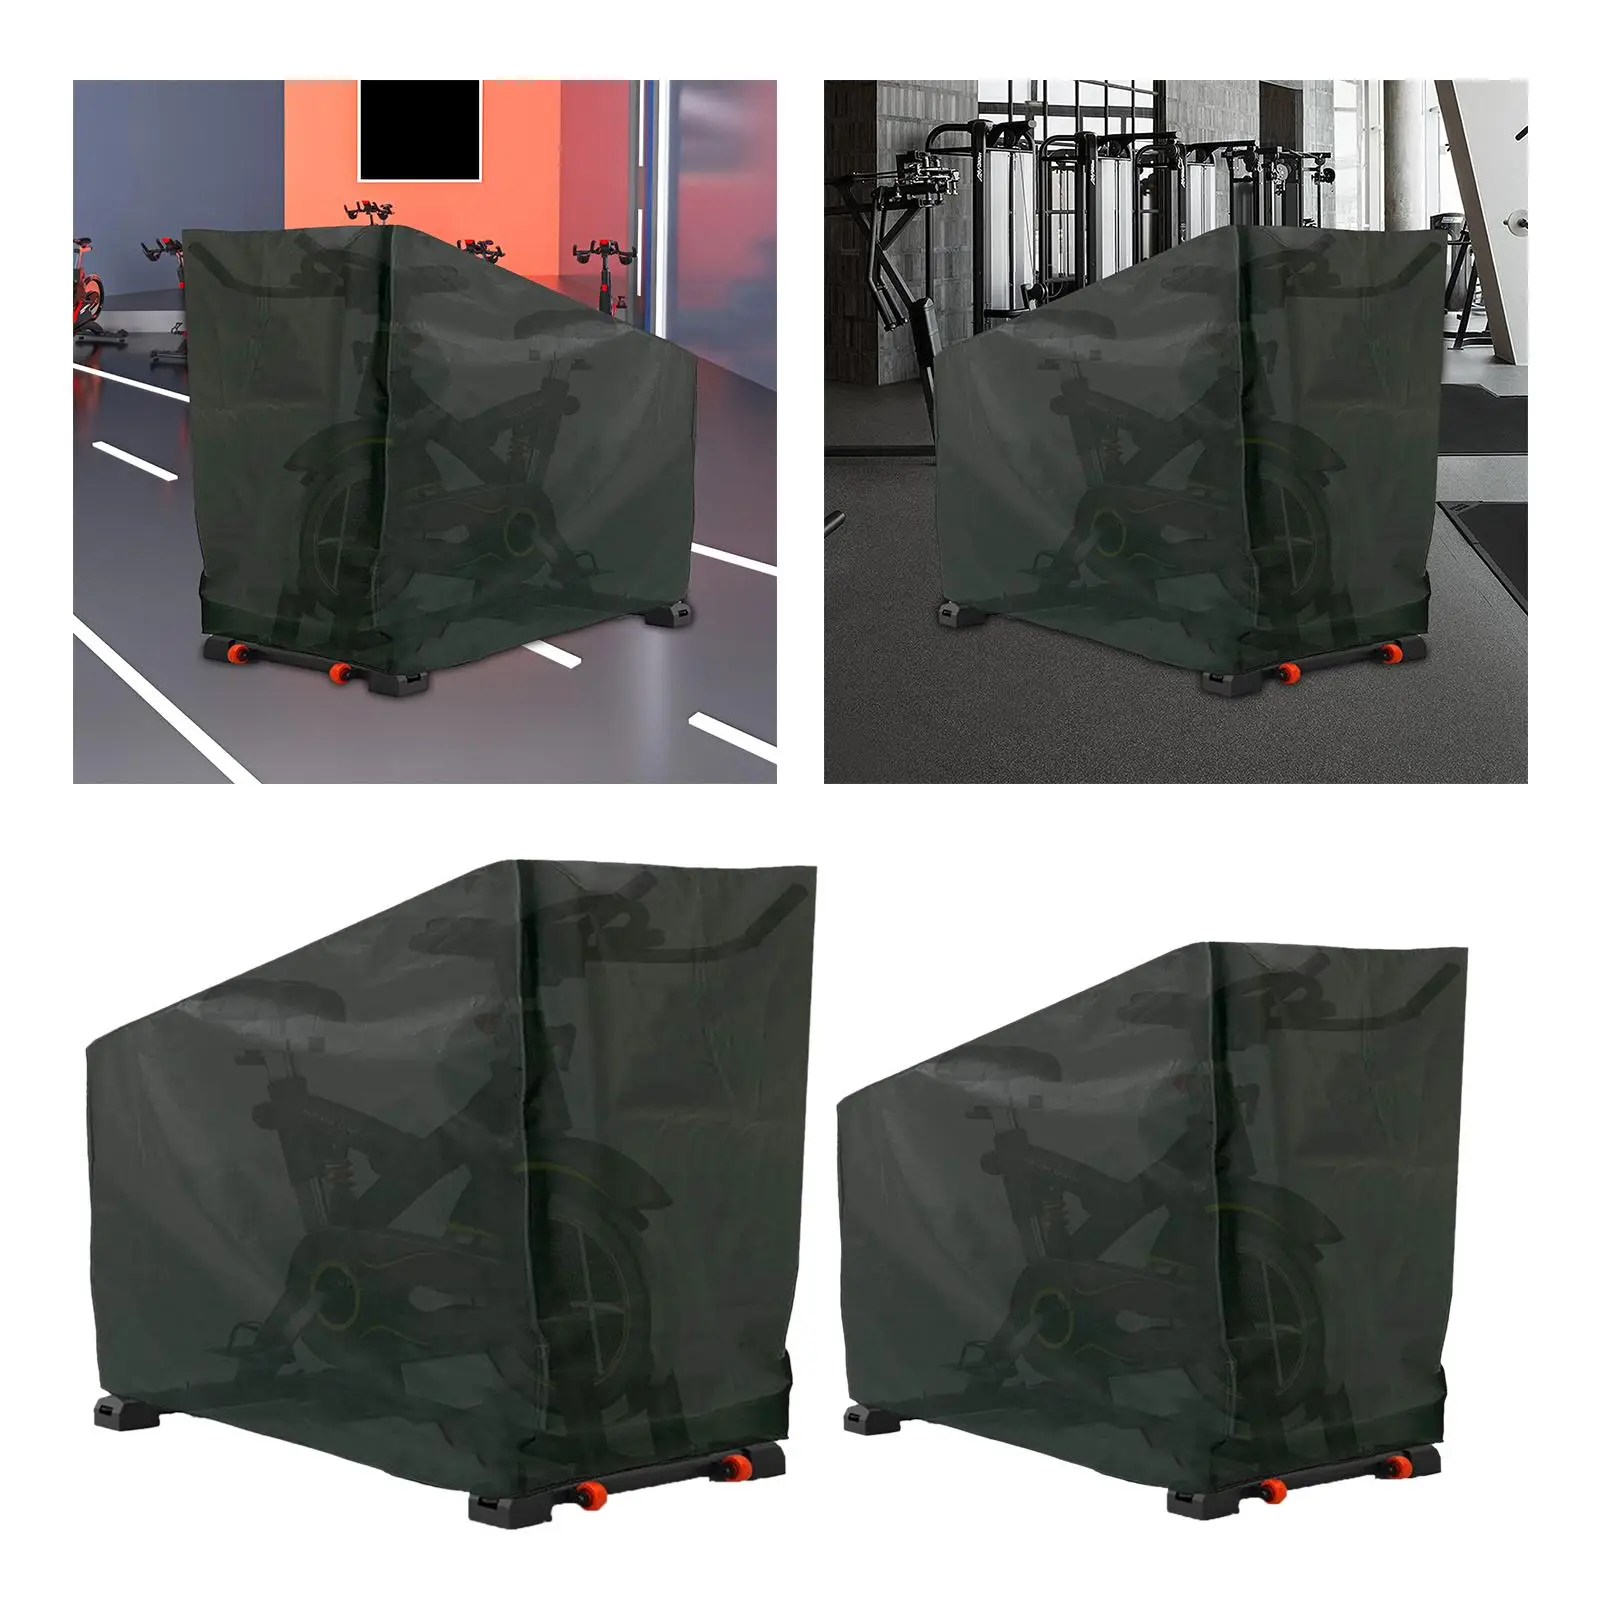 Indoor Cycling Stationary Cover Waterproof Heavy Duty Stationary Bike Cover Storage Cover Dust Cover for Outdoor Protection